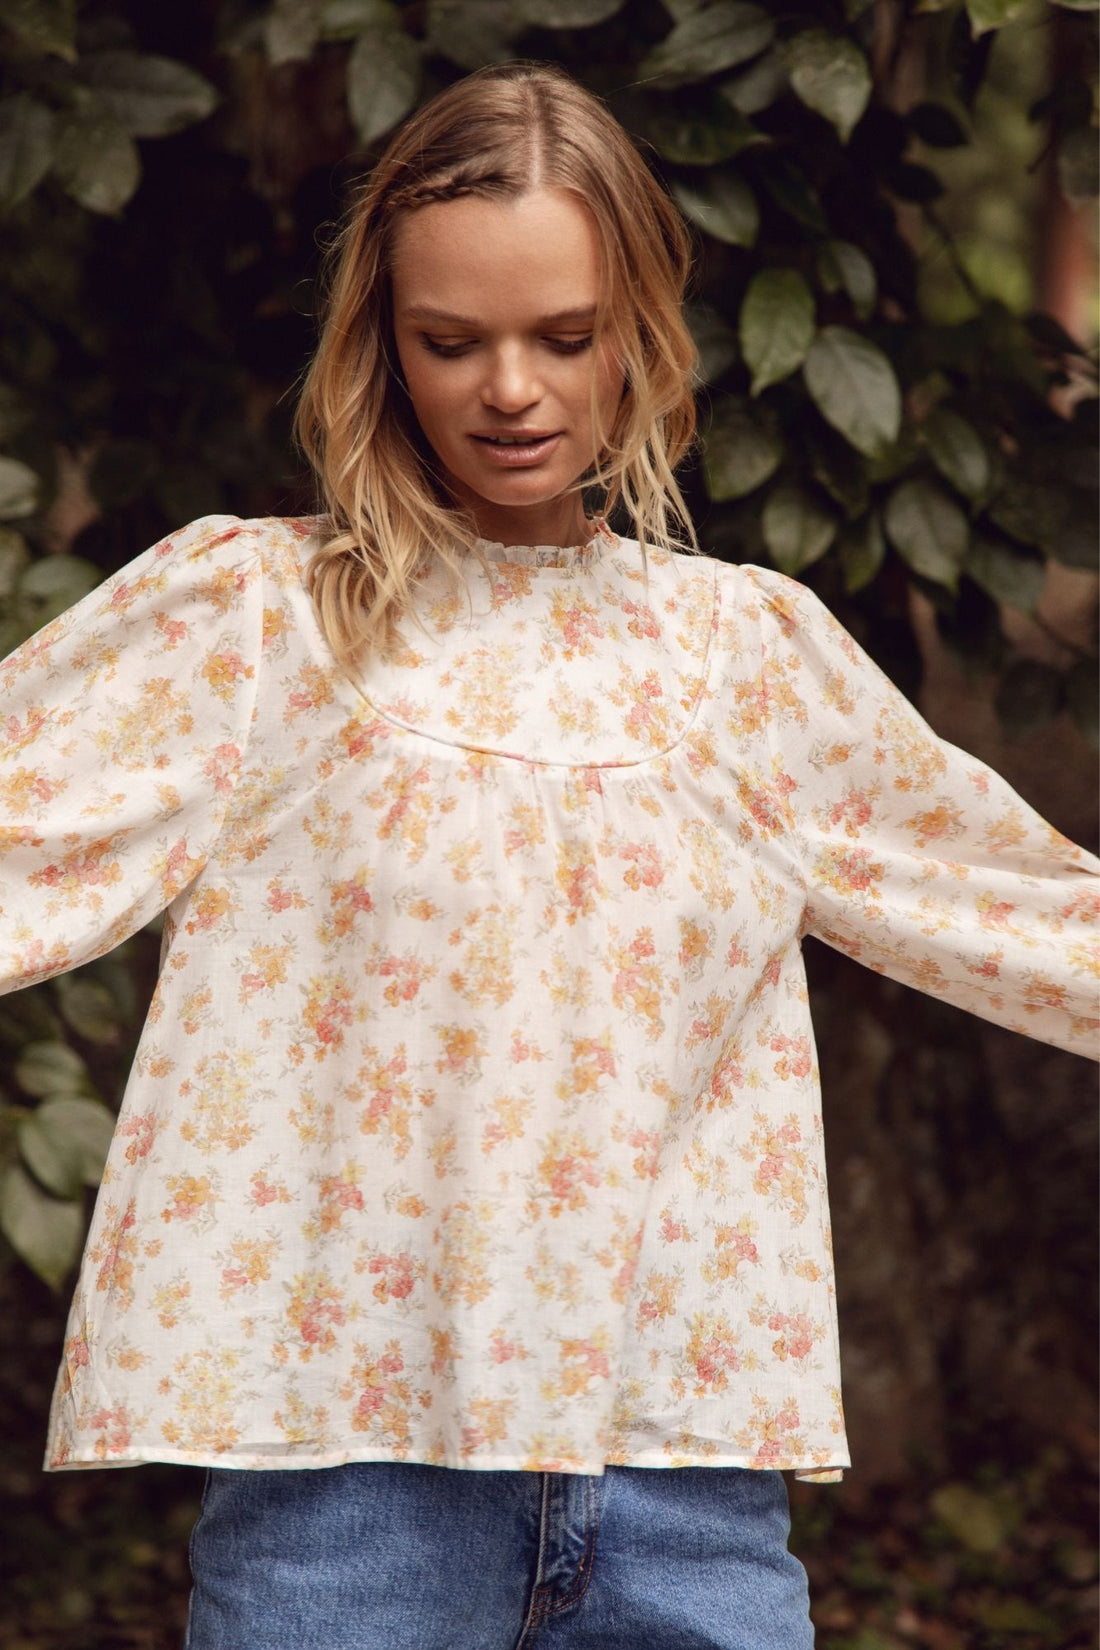 Oak Meadow Clothing - Ethical and Sustainable slow fashion clothing